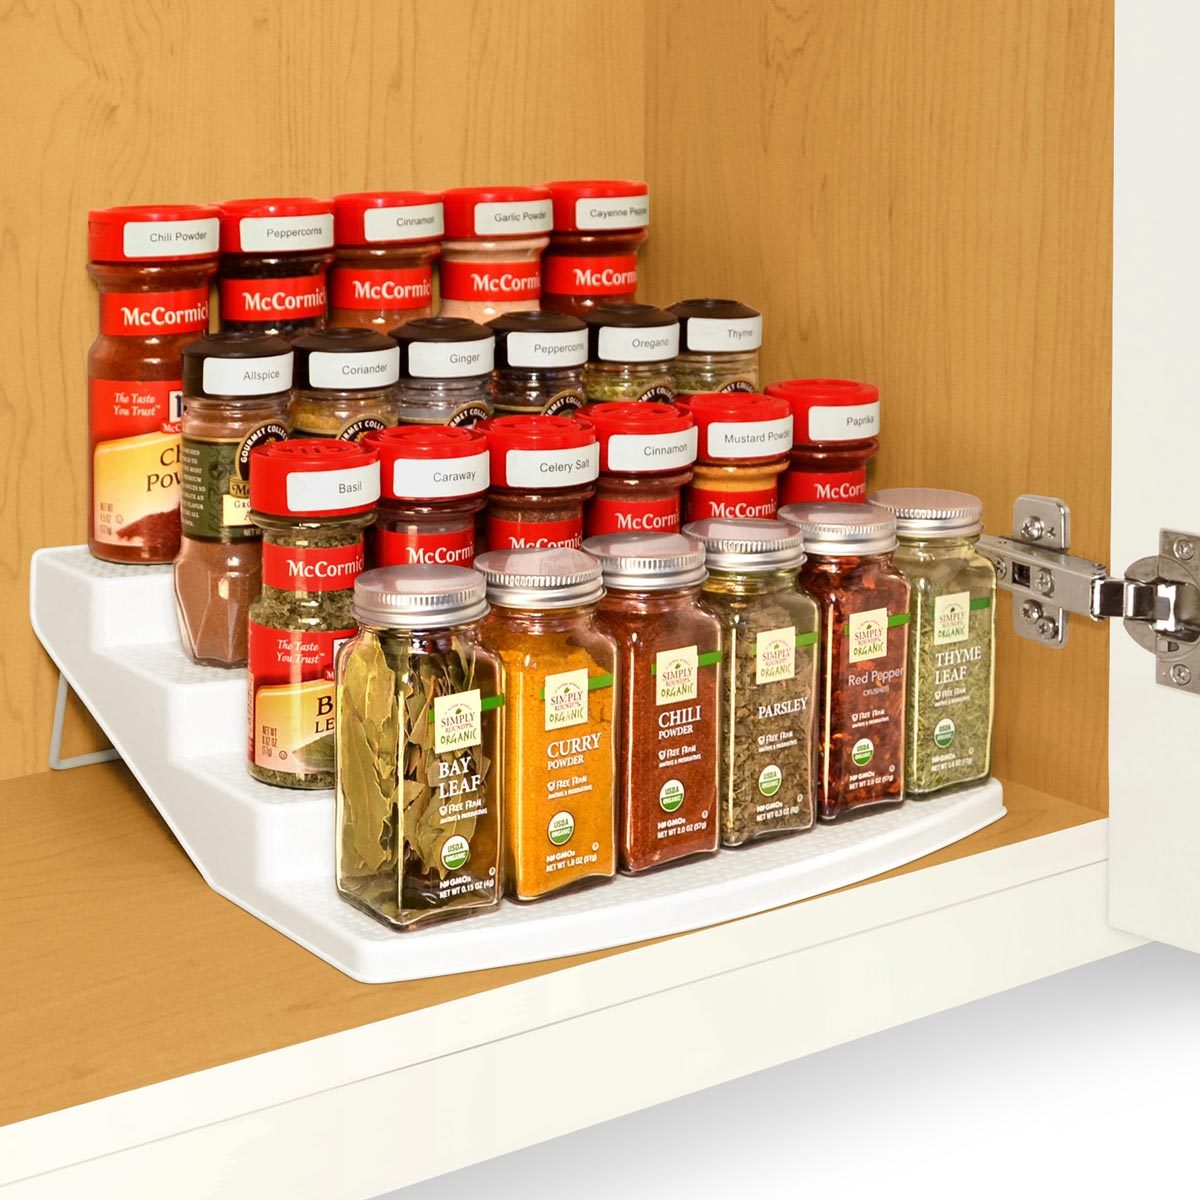 12 Spice Storage Ideas for a Well-Seasoned Kitchen